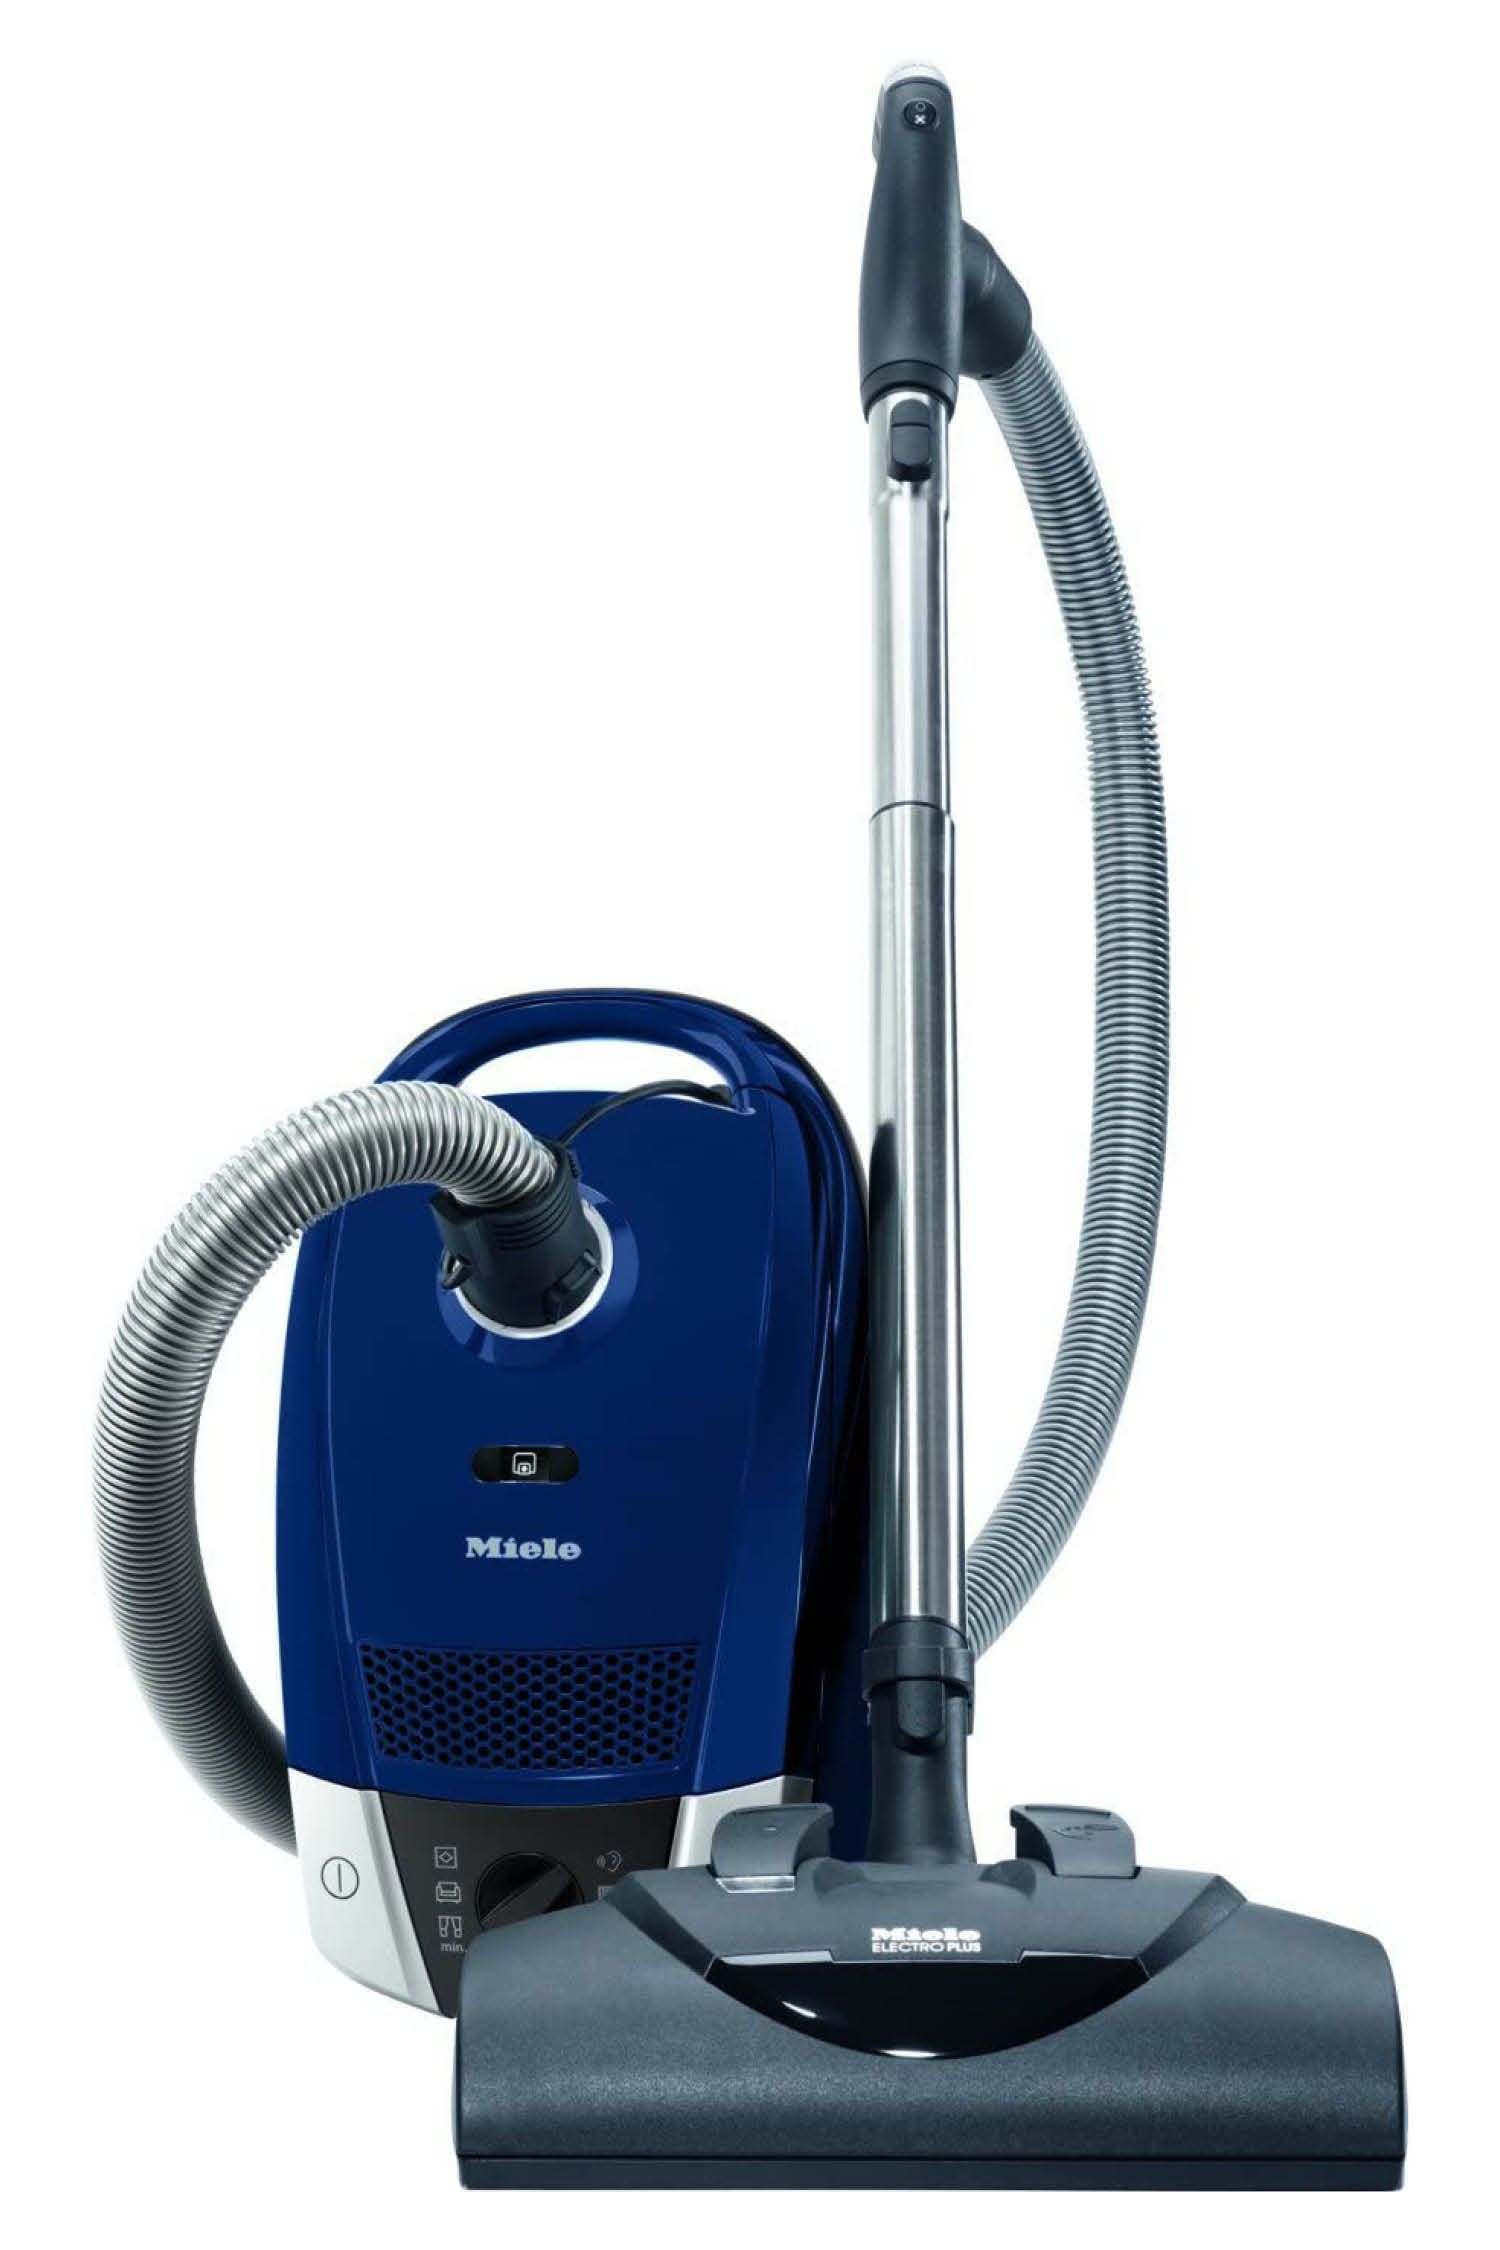 10 Best Canister Vacuums For 2021, Best Canister Vacuum For Hardwood Floors And Rugs